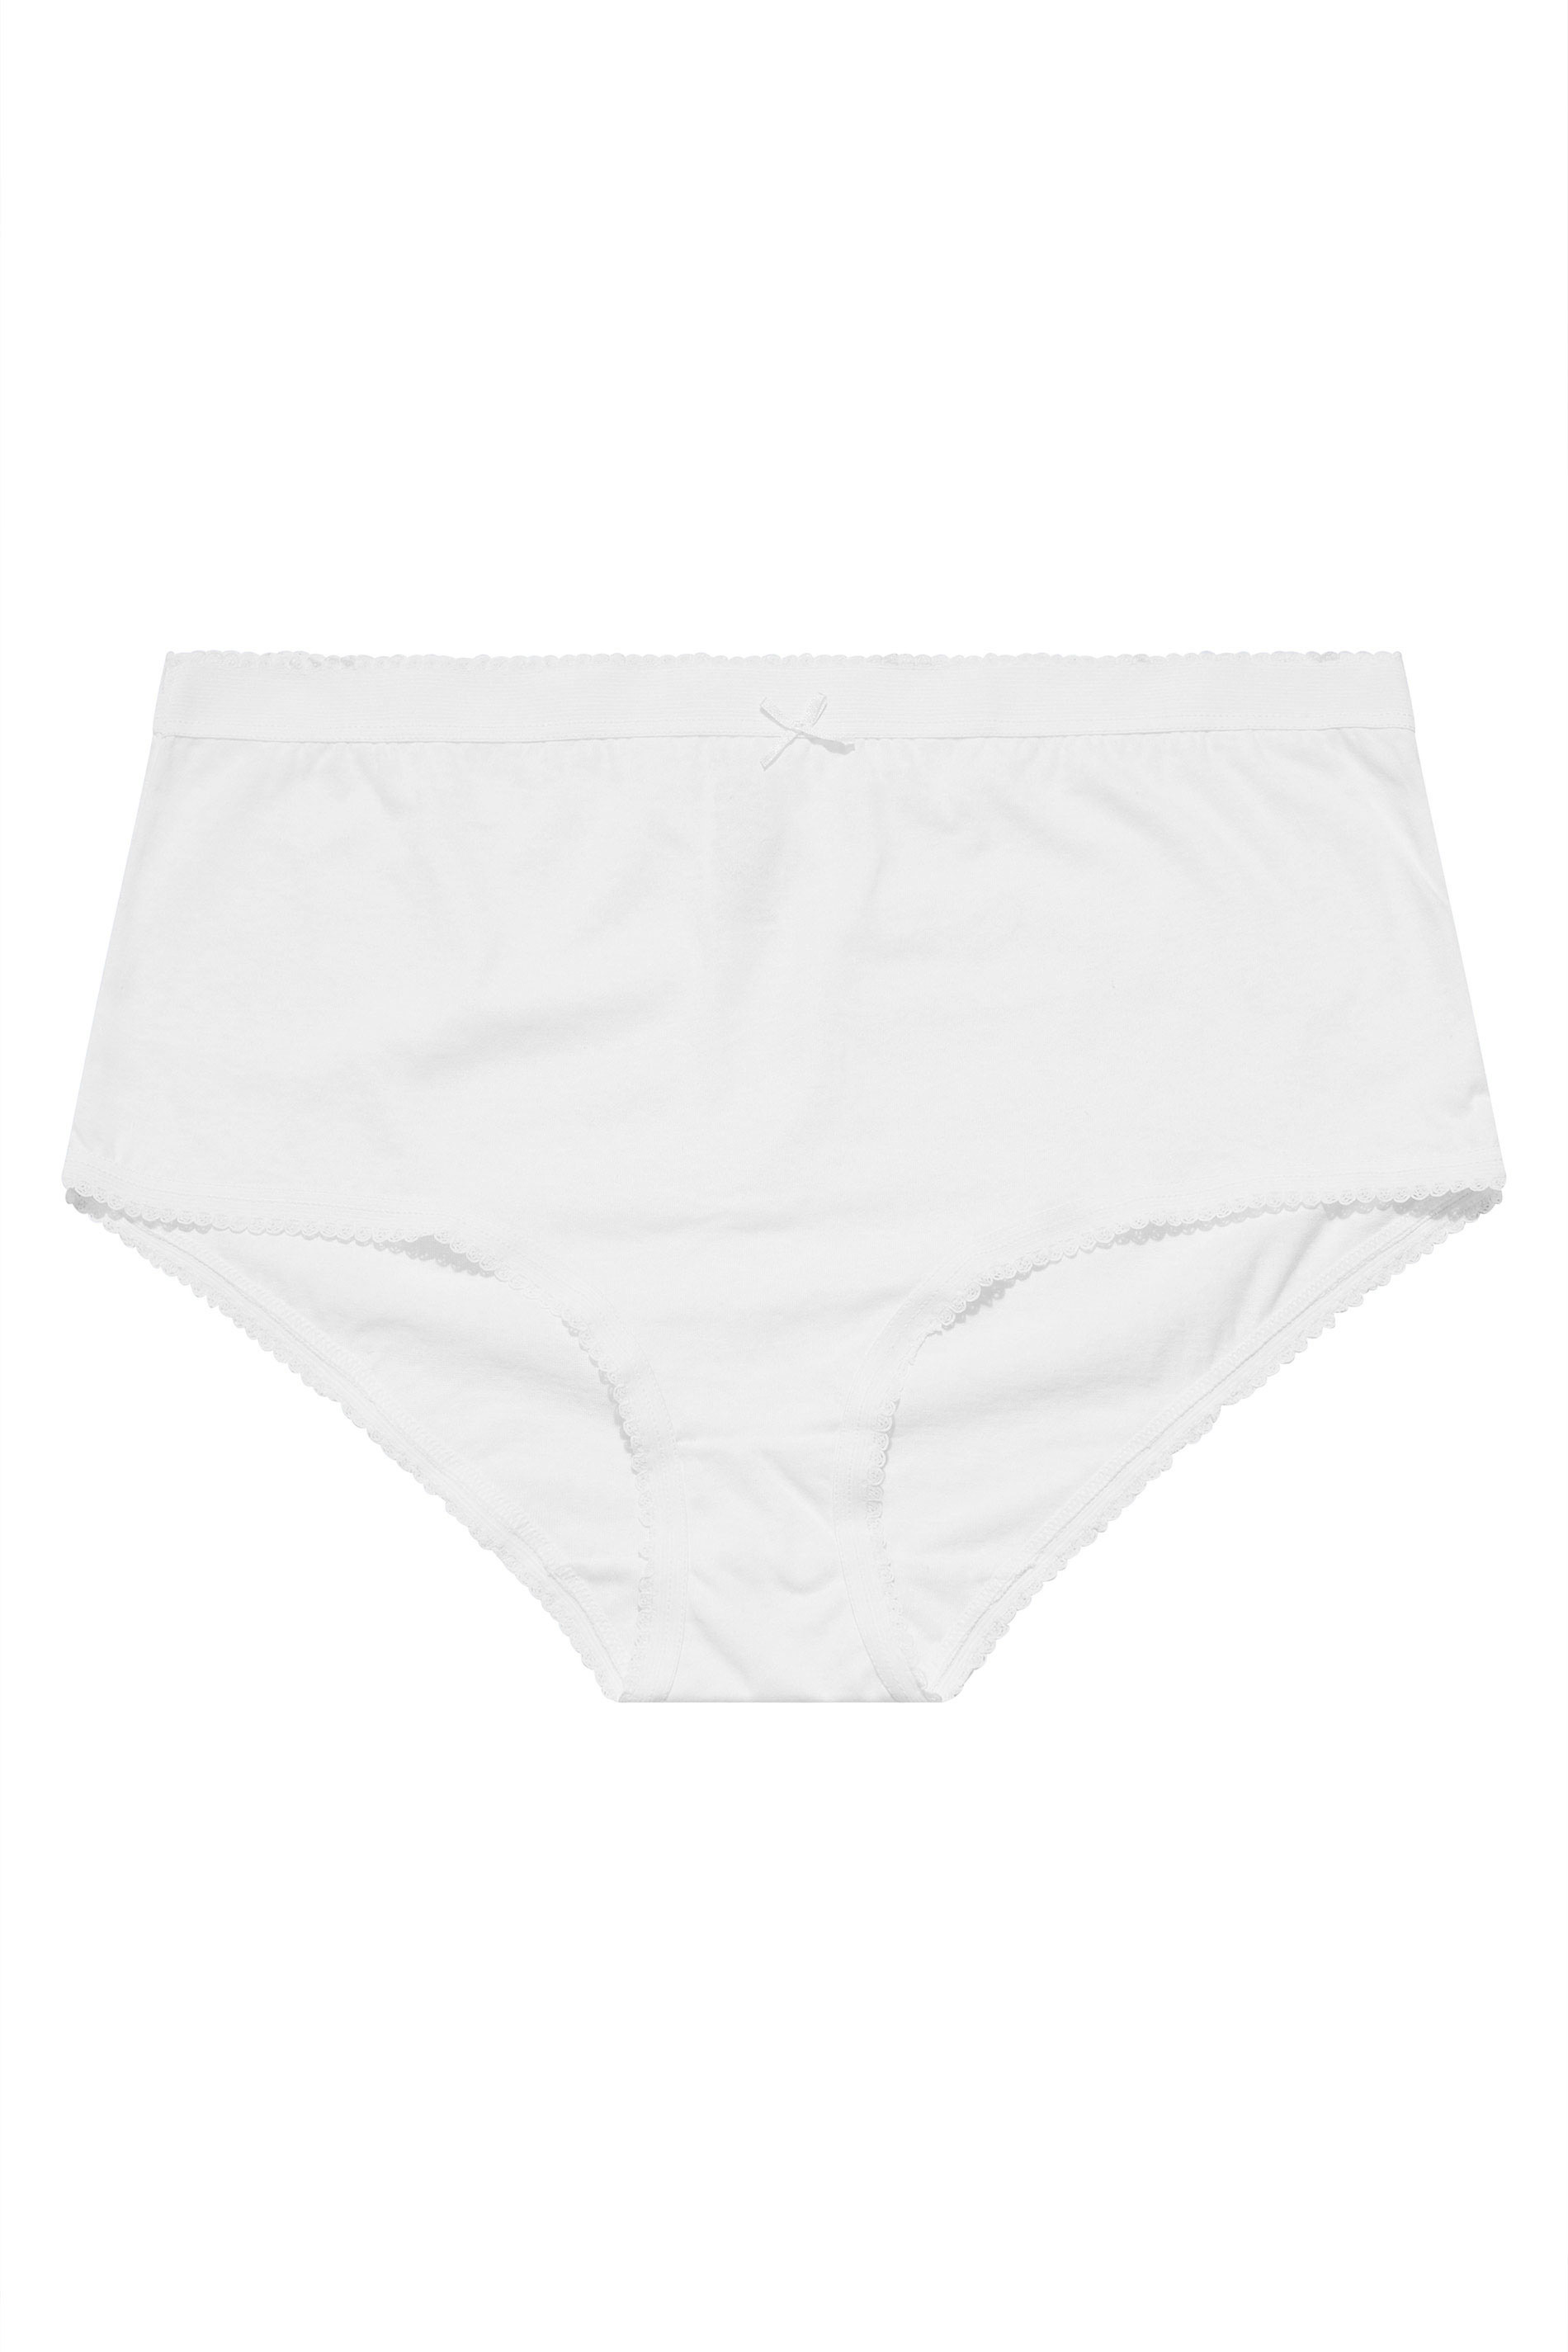 5 PACK Curve White & Grey Plain Cotton High Waisted Full Briefs